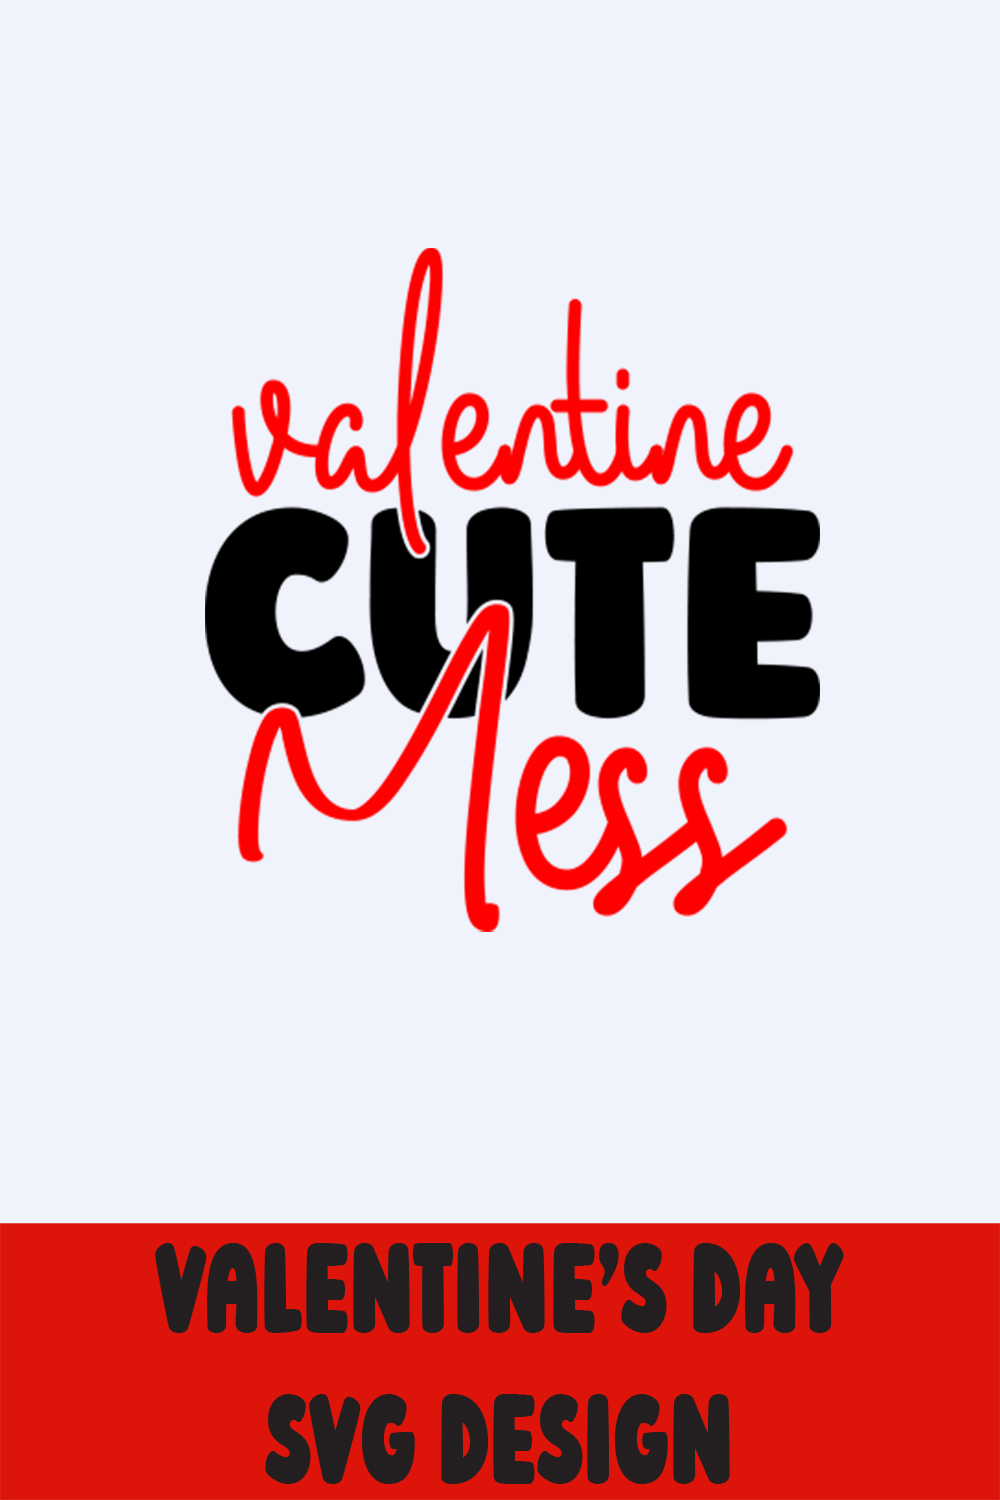 Image with gorgeous Valentine Cute Mess inscription